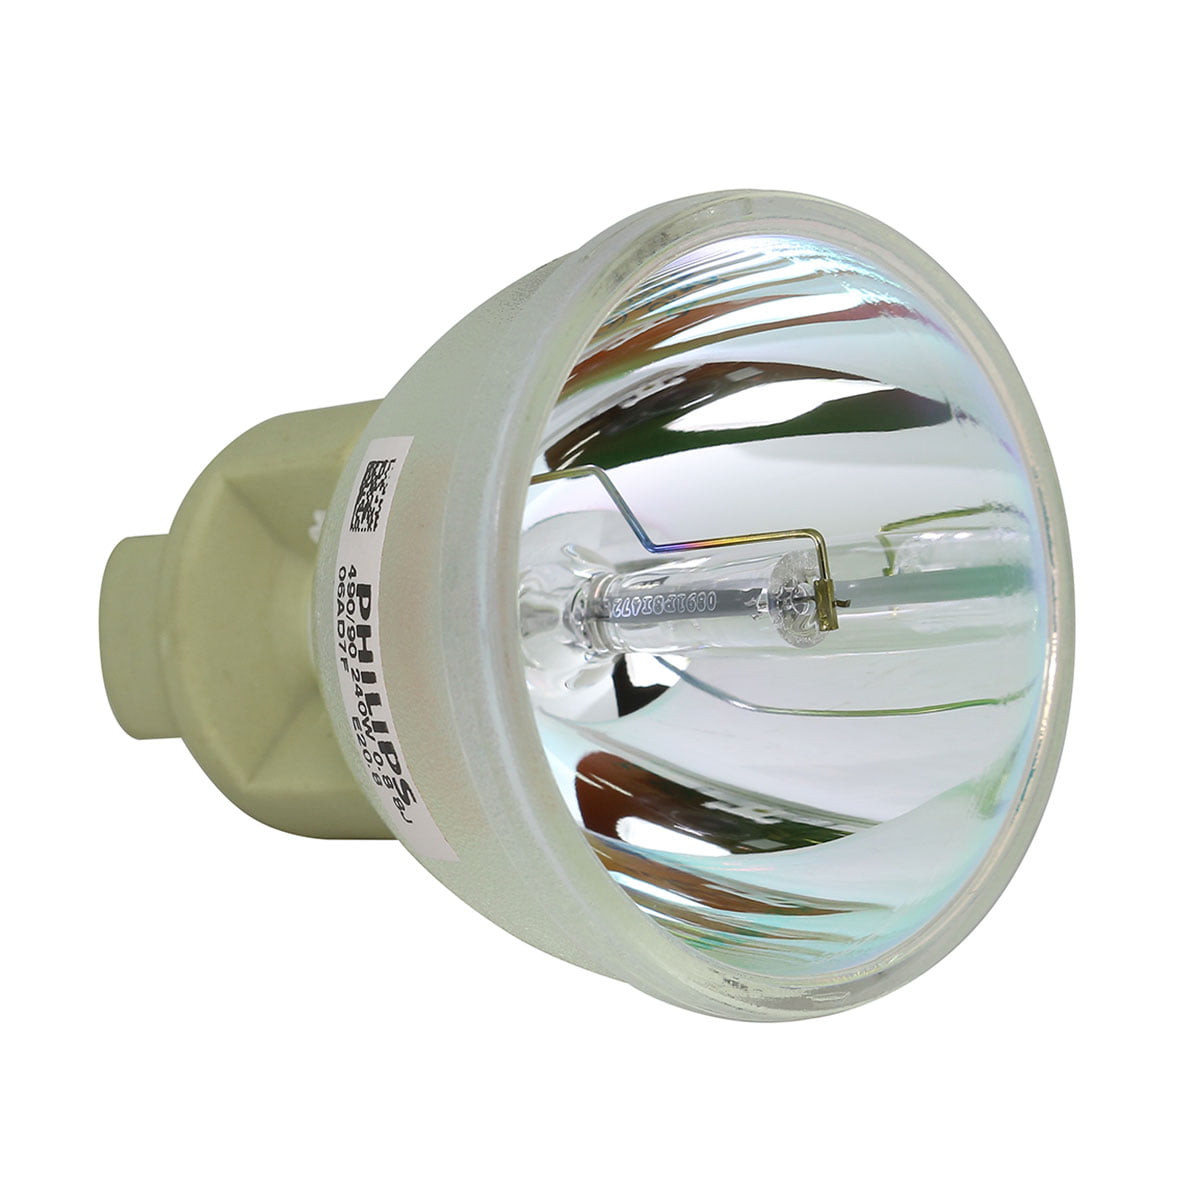 Original Philips Projector Lamp Replacement for HD33 (Bulb Only) - Walmart.com